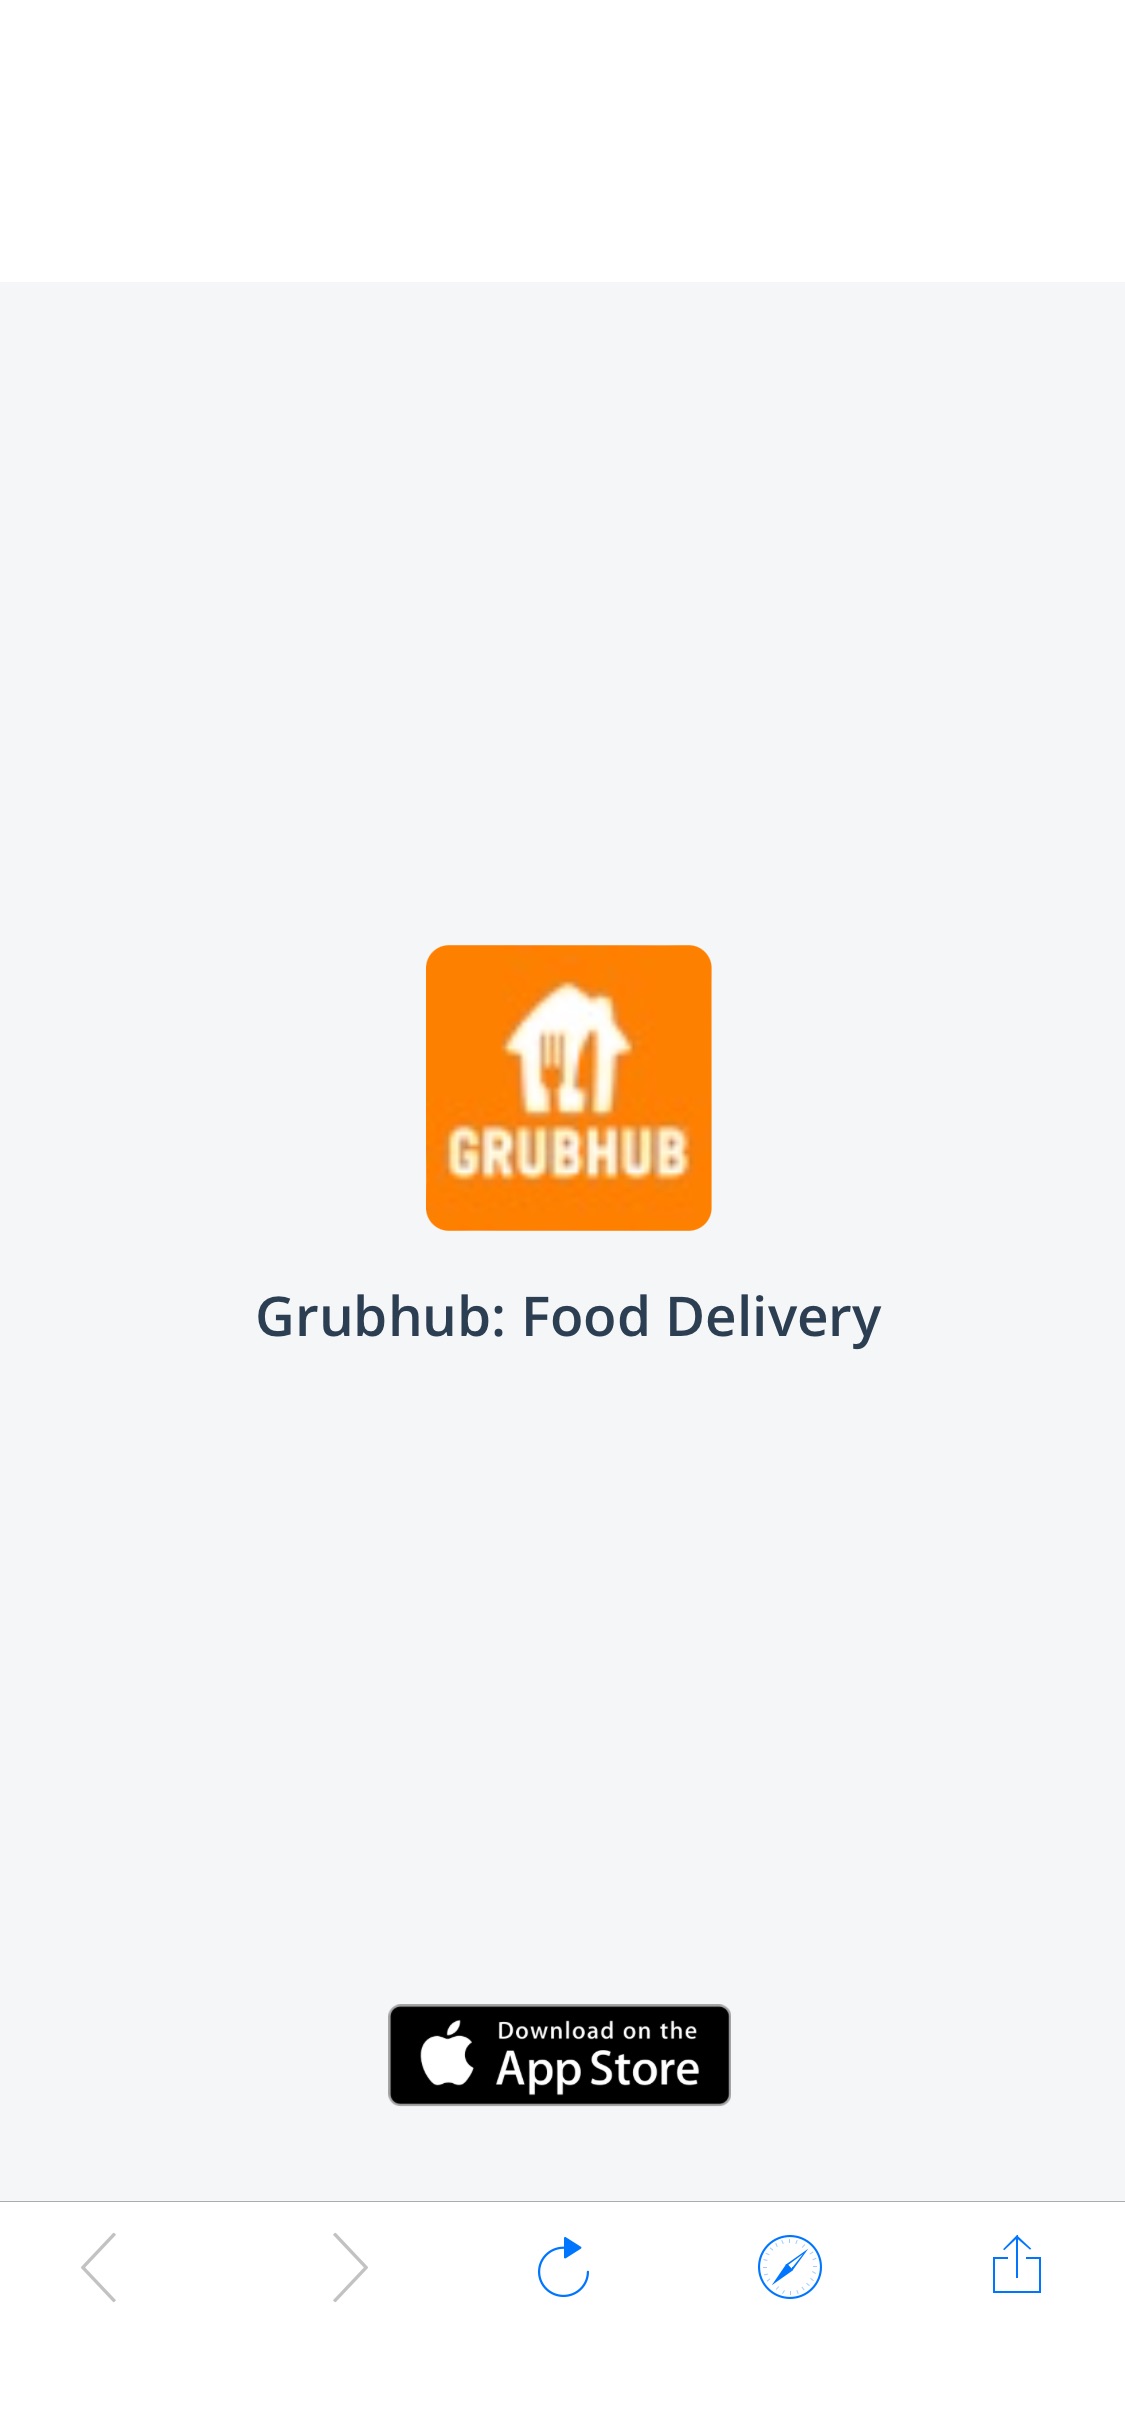 Grubhub is offering a $15 off $25+ delivery order with promo code "TAXBREAK". The deal is available nationwide on April 15 only,